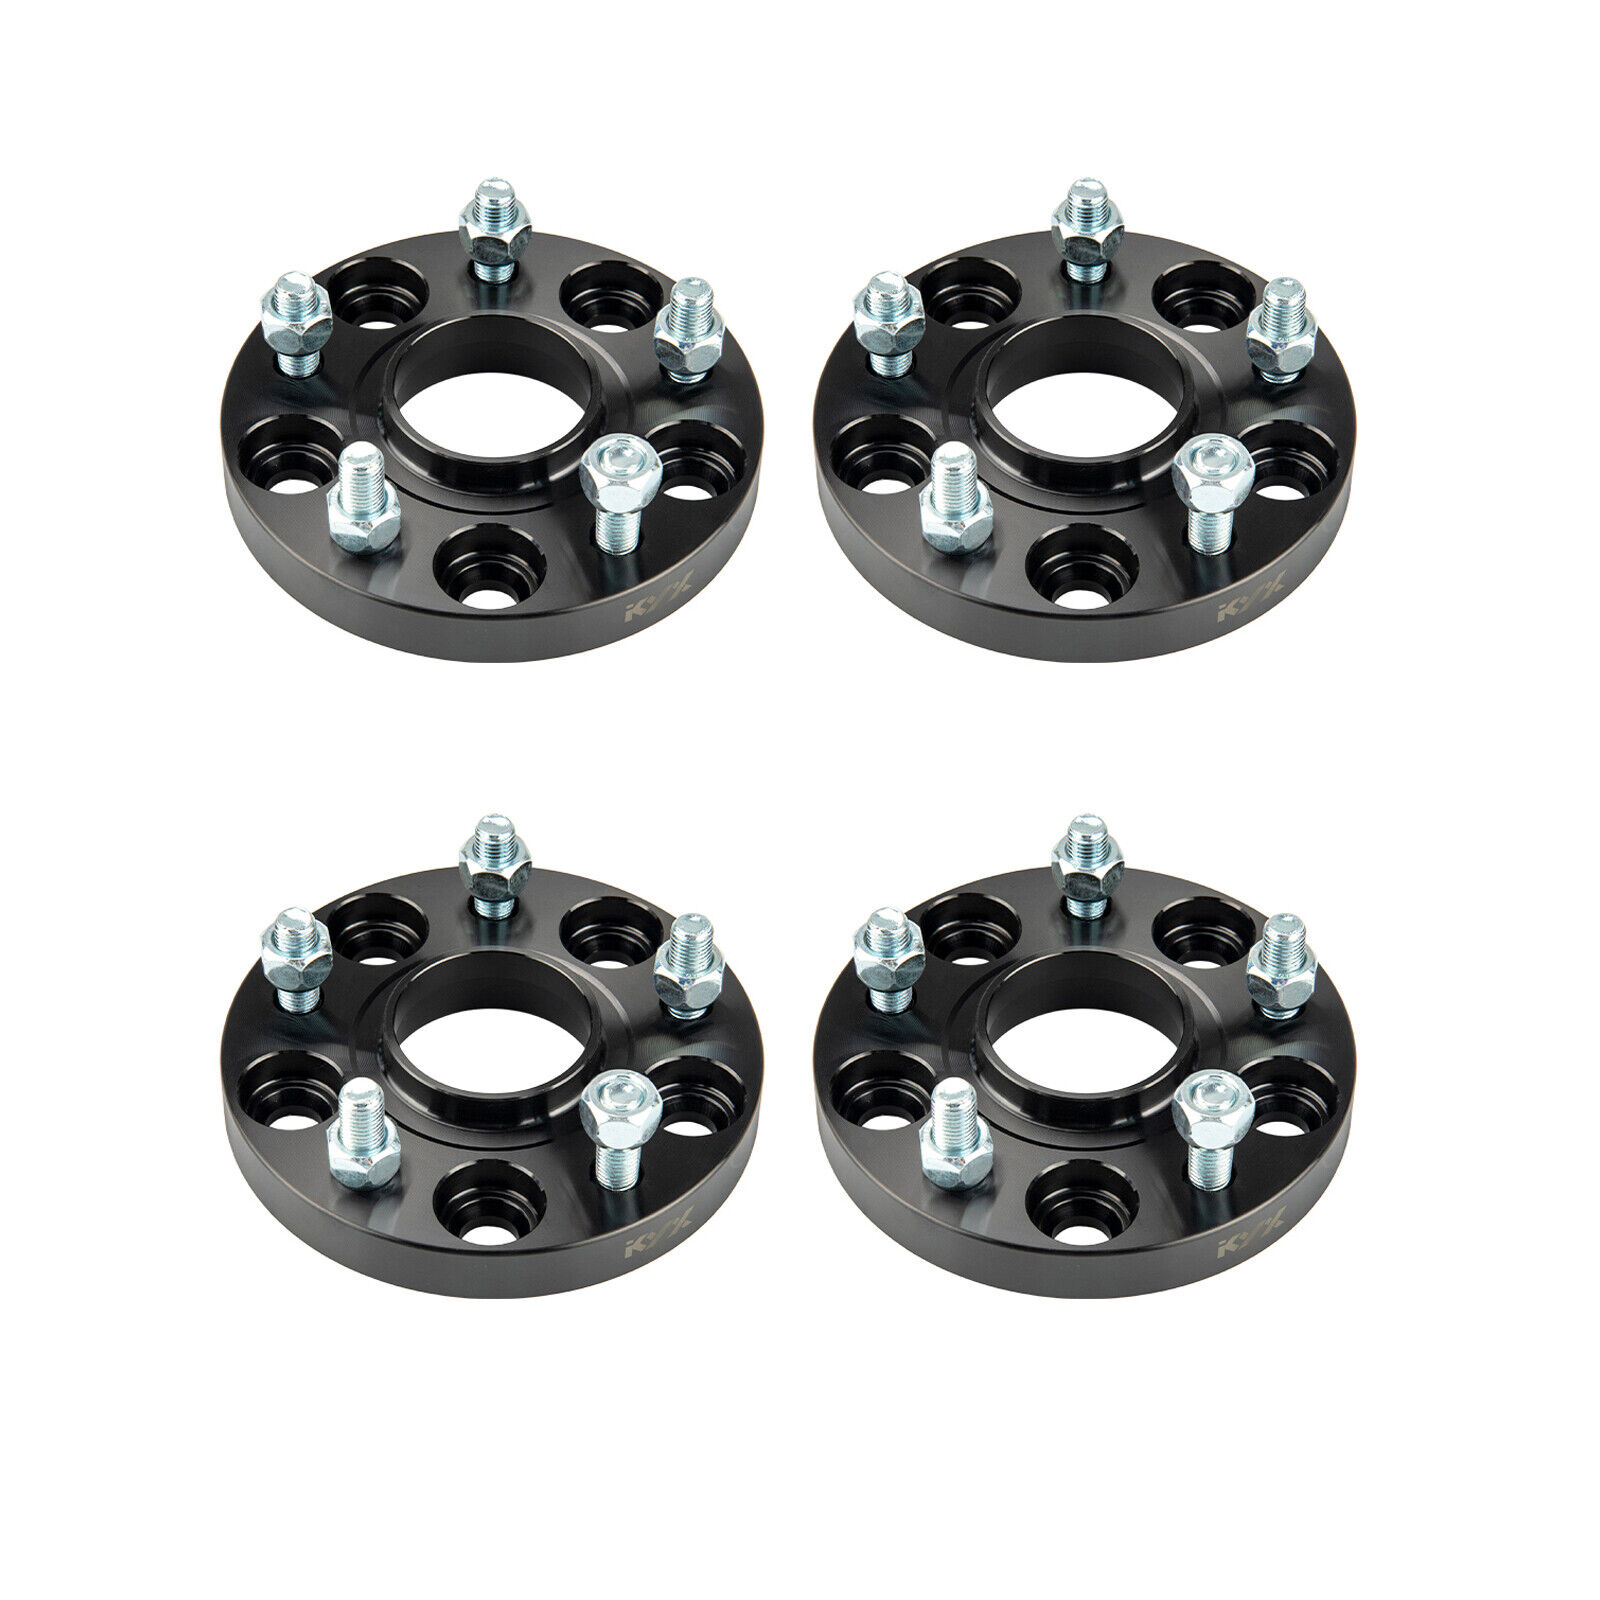 4pc 20mm Black Wheel Spacers 5x4.5 For IS250 IS300 IS350 GS300 GS350 GS460 Camry